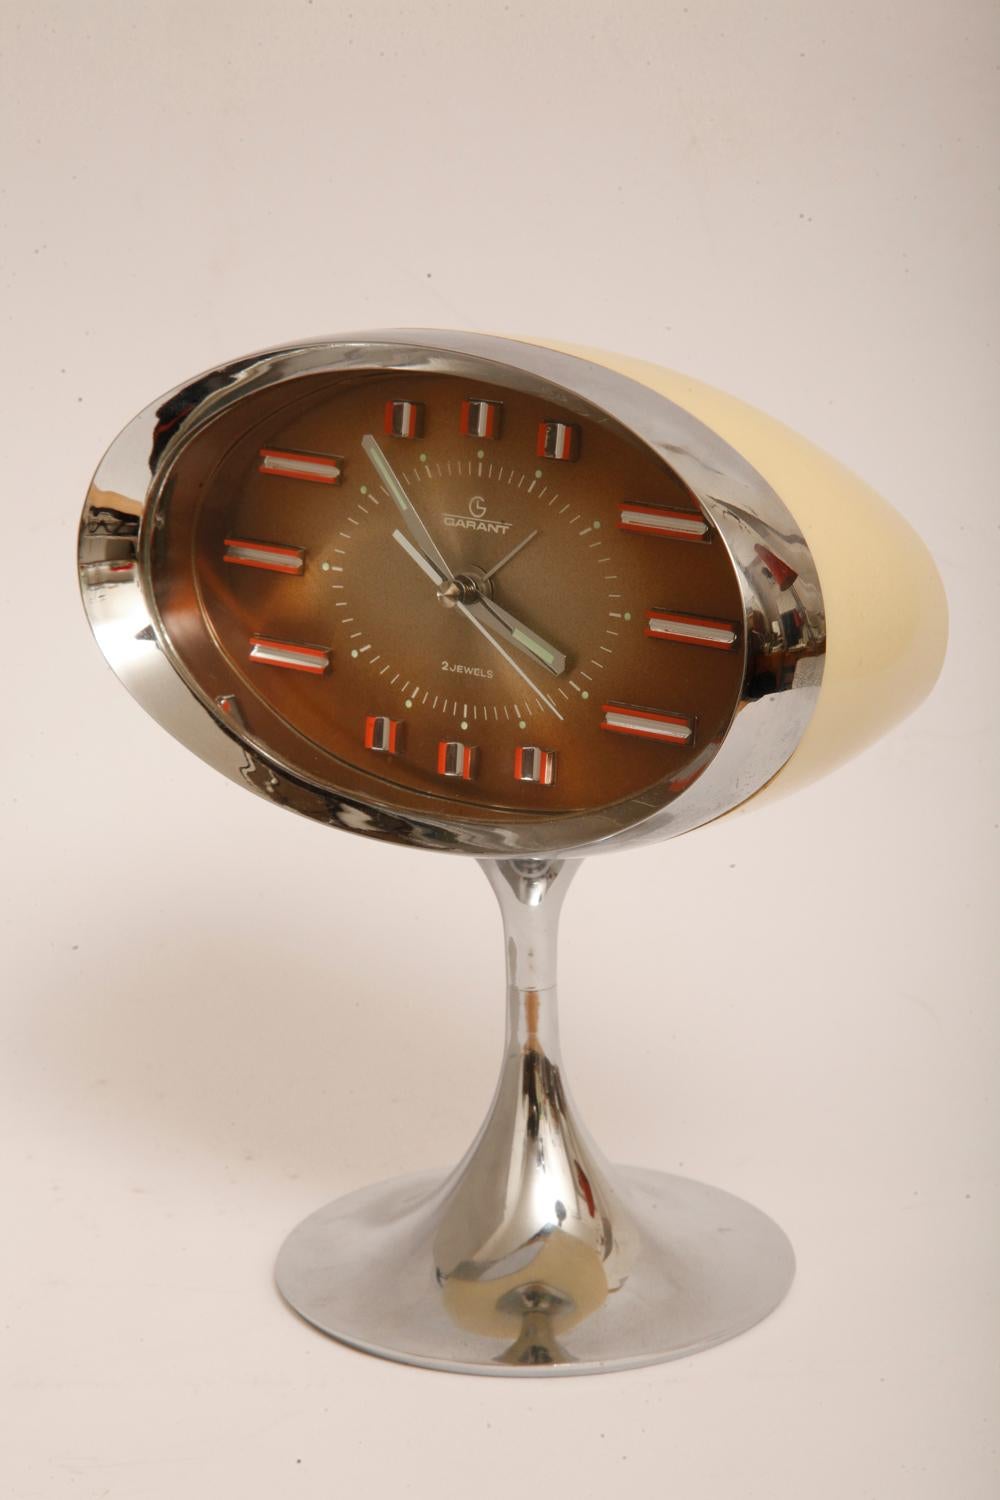 Japanese Space Age Alarm Clock Garant, Plastic and Chromed, 1970s For Sale 5